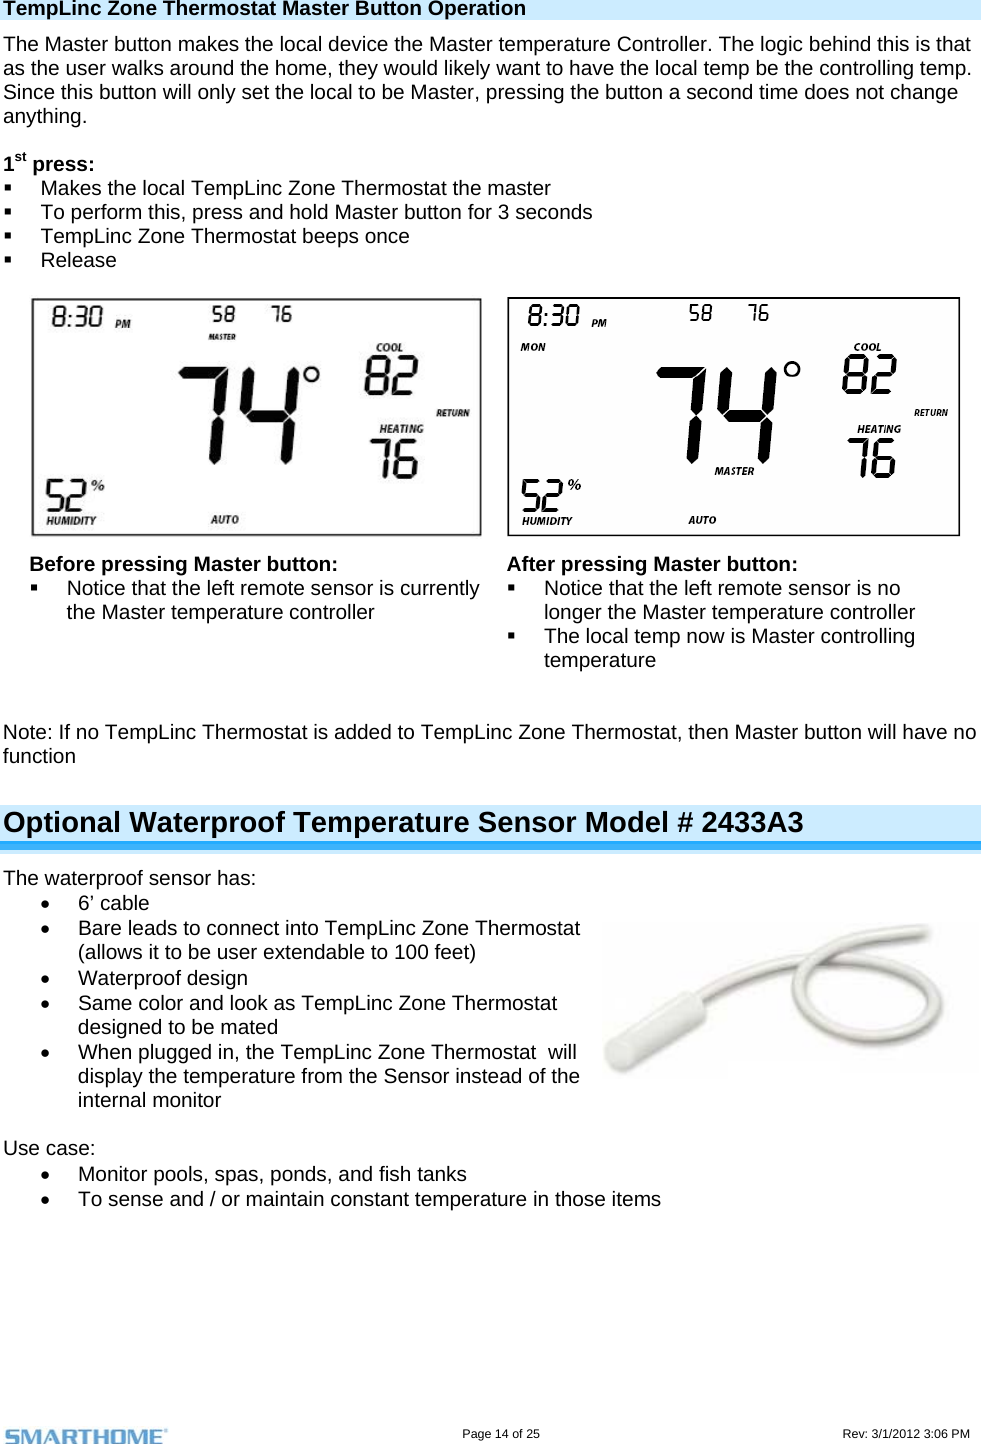                                                                                                                                   Page 14 of 25                                                                                       Rev: 3/1/2012 3:06 PM TempLinc Zone Thermostat Master Button Operation The Master button makes the local device the Master temperature Controller. The logic behind this is that as the user walks around the home, they would likely want to have the local temp be the controlling temp. Since this button will only set the local to be Master, pressing the button a second time does not change anything.  1st press:    Makes the local TempLinc Zone Thermostat the master   To perform this, press and hold Master button for 3 seconds   TempLinc Zone Thermostat beeps once  Release  Before pressing Master button:   Notice that the left remote sensor is currently the Master temperature controller After pressing Master button:   Notice that the left remote sensor is no longer the Master temperature controller   The local temp now is Master controlling temperature   Note: If no TempLinc Thermostat is added to TempLinc Zone Thermostat, then Master button will have no function Optional Waterproof Temperature Sensor Model # 2433A3 The waterproof sensor has:  6’ cable   Bare leads to connect into TempLinc Zone Thermostat (allows it to be user extendable to 100 feet)  Waterproof design   Same color and look as TempLinc Zone Thermostat designed to be mated   When plugged in, the TempLinc Zone Thermostat  will display the temperature from the Sensor instead of the internal monitor   Use case:   Monitor pools, spas, ponds, and fish tanks   To sense and / or maintain constant temperature in those items    